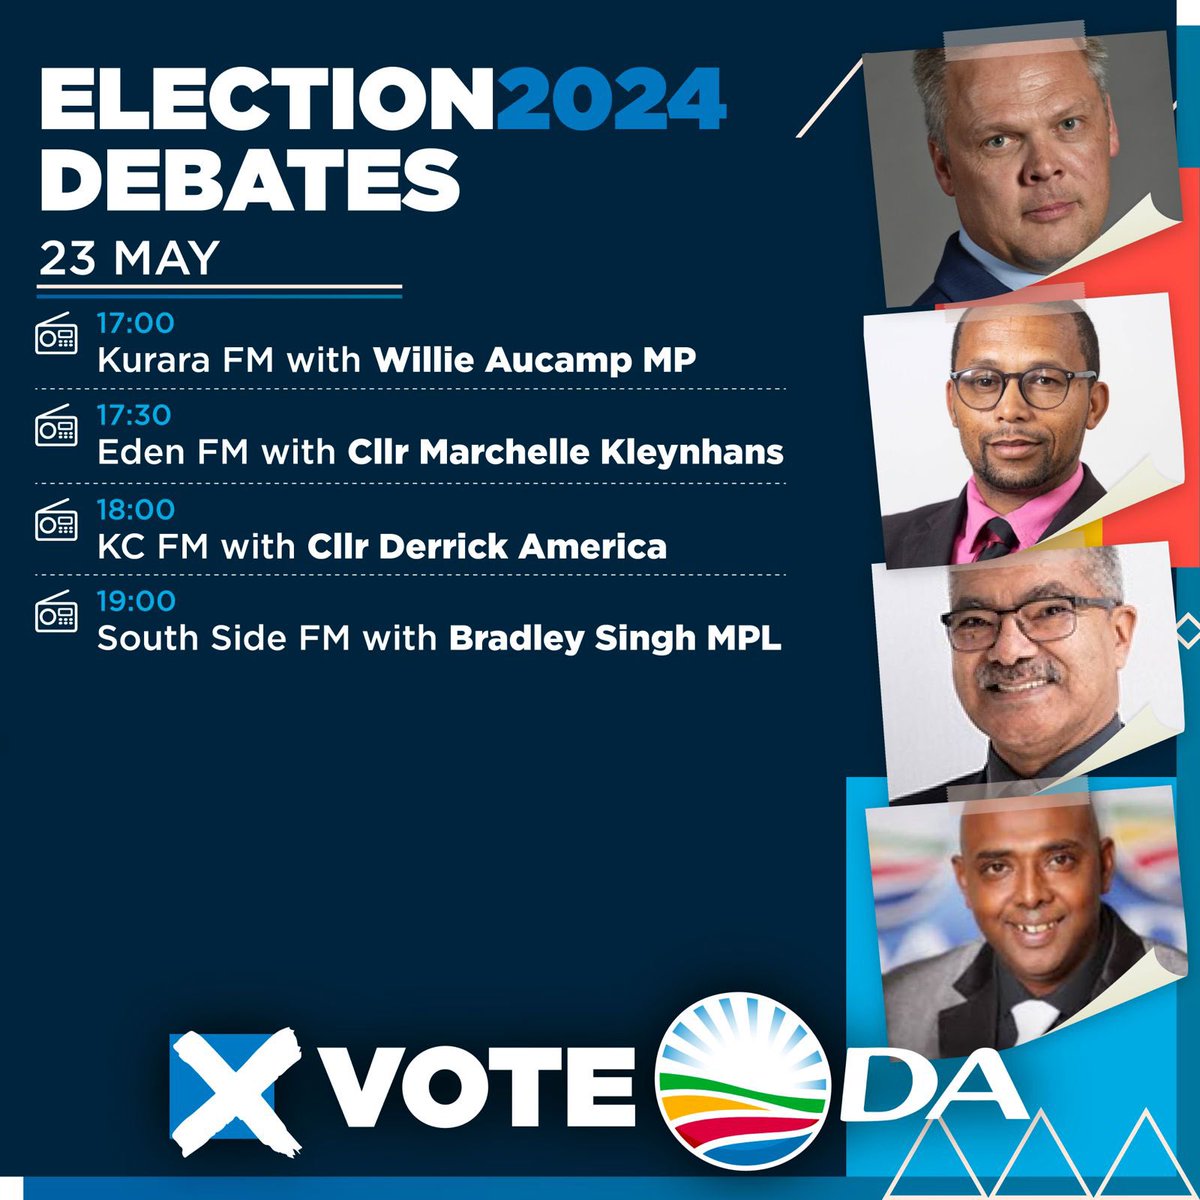 📻 Tune in to these radio stations for live Election 2024 debates with our leaders! In this election, the choice is clear. You can vote DA, a party that governs effectively. Or, for a coalition of corruption led by the ANC with the EFF and MK. Don't miss out! #RescueSA #VoteDA